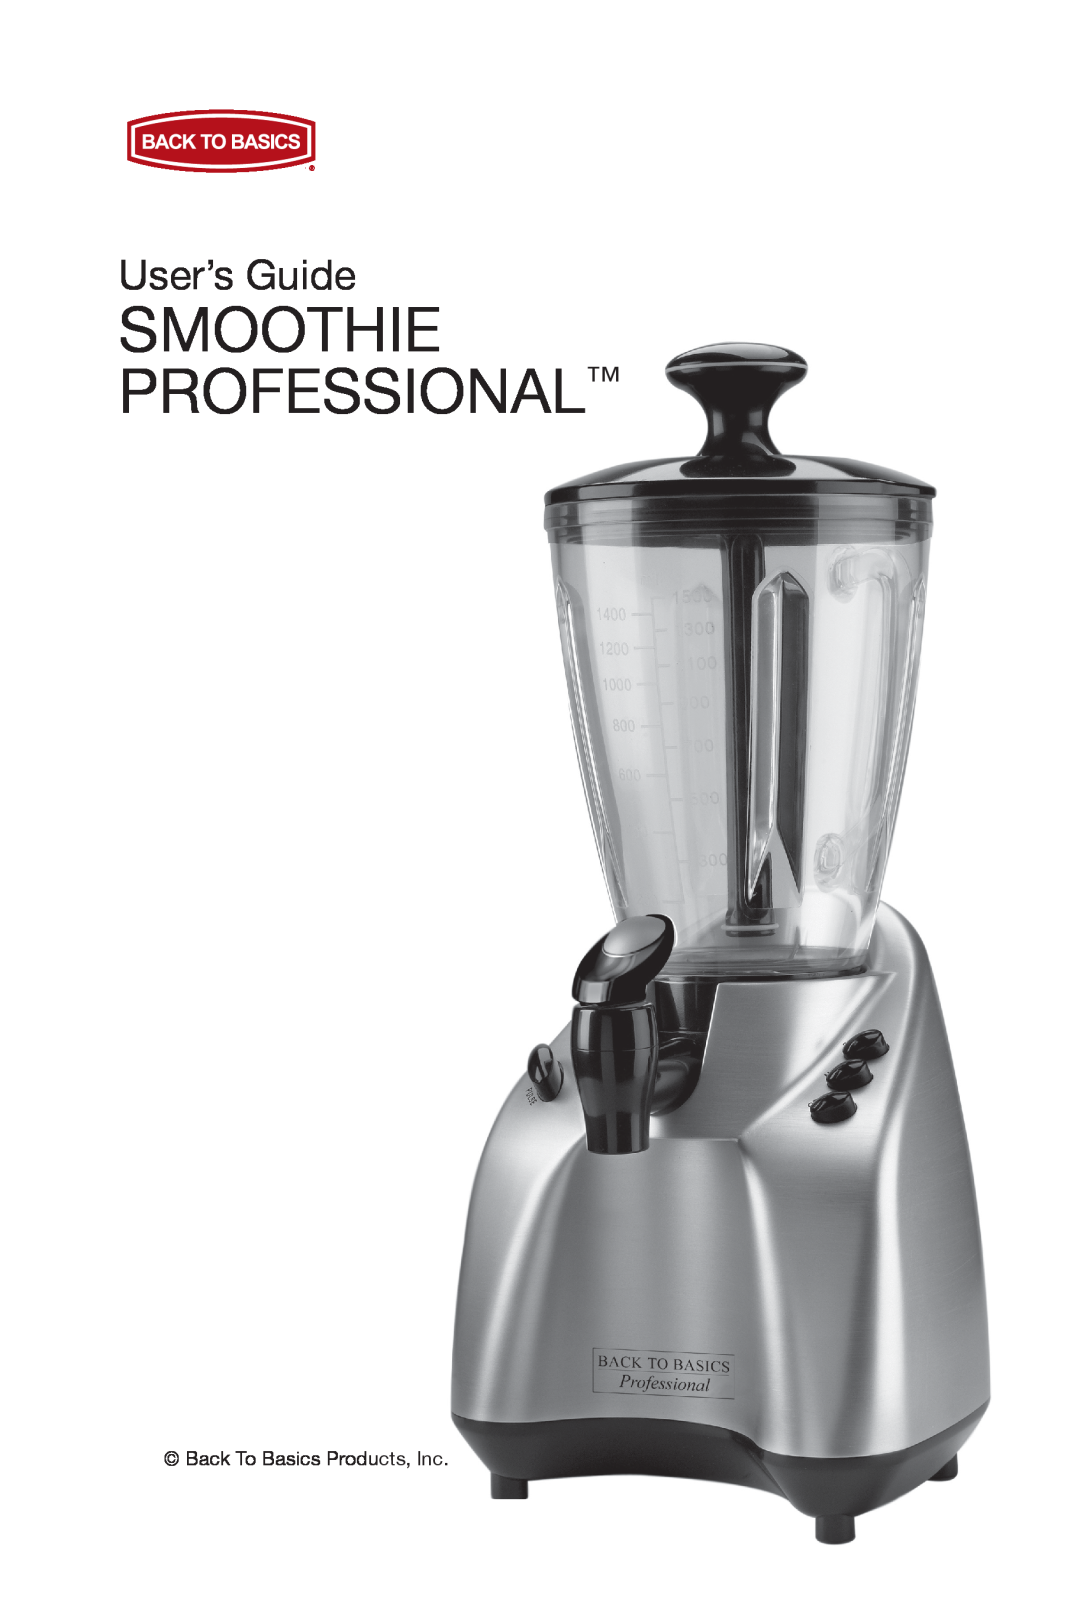 West Bend Back to Basics Smoothie Professional manual User’s Guide 